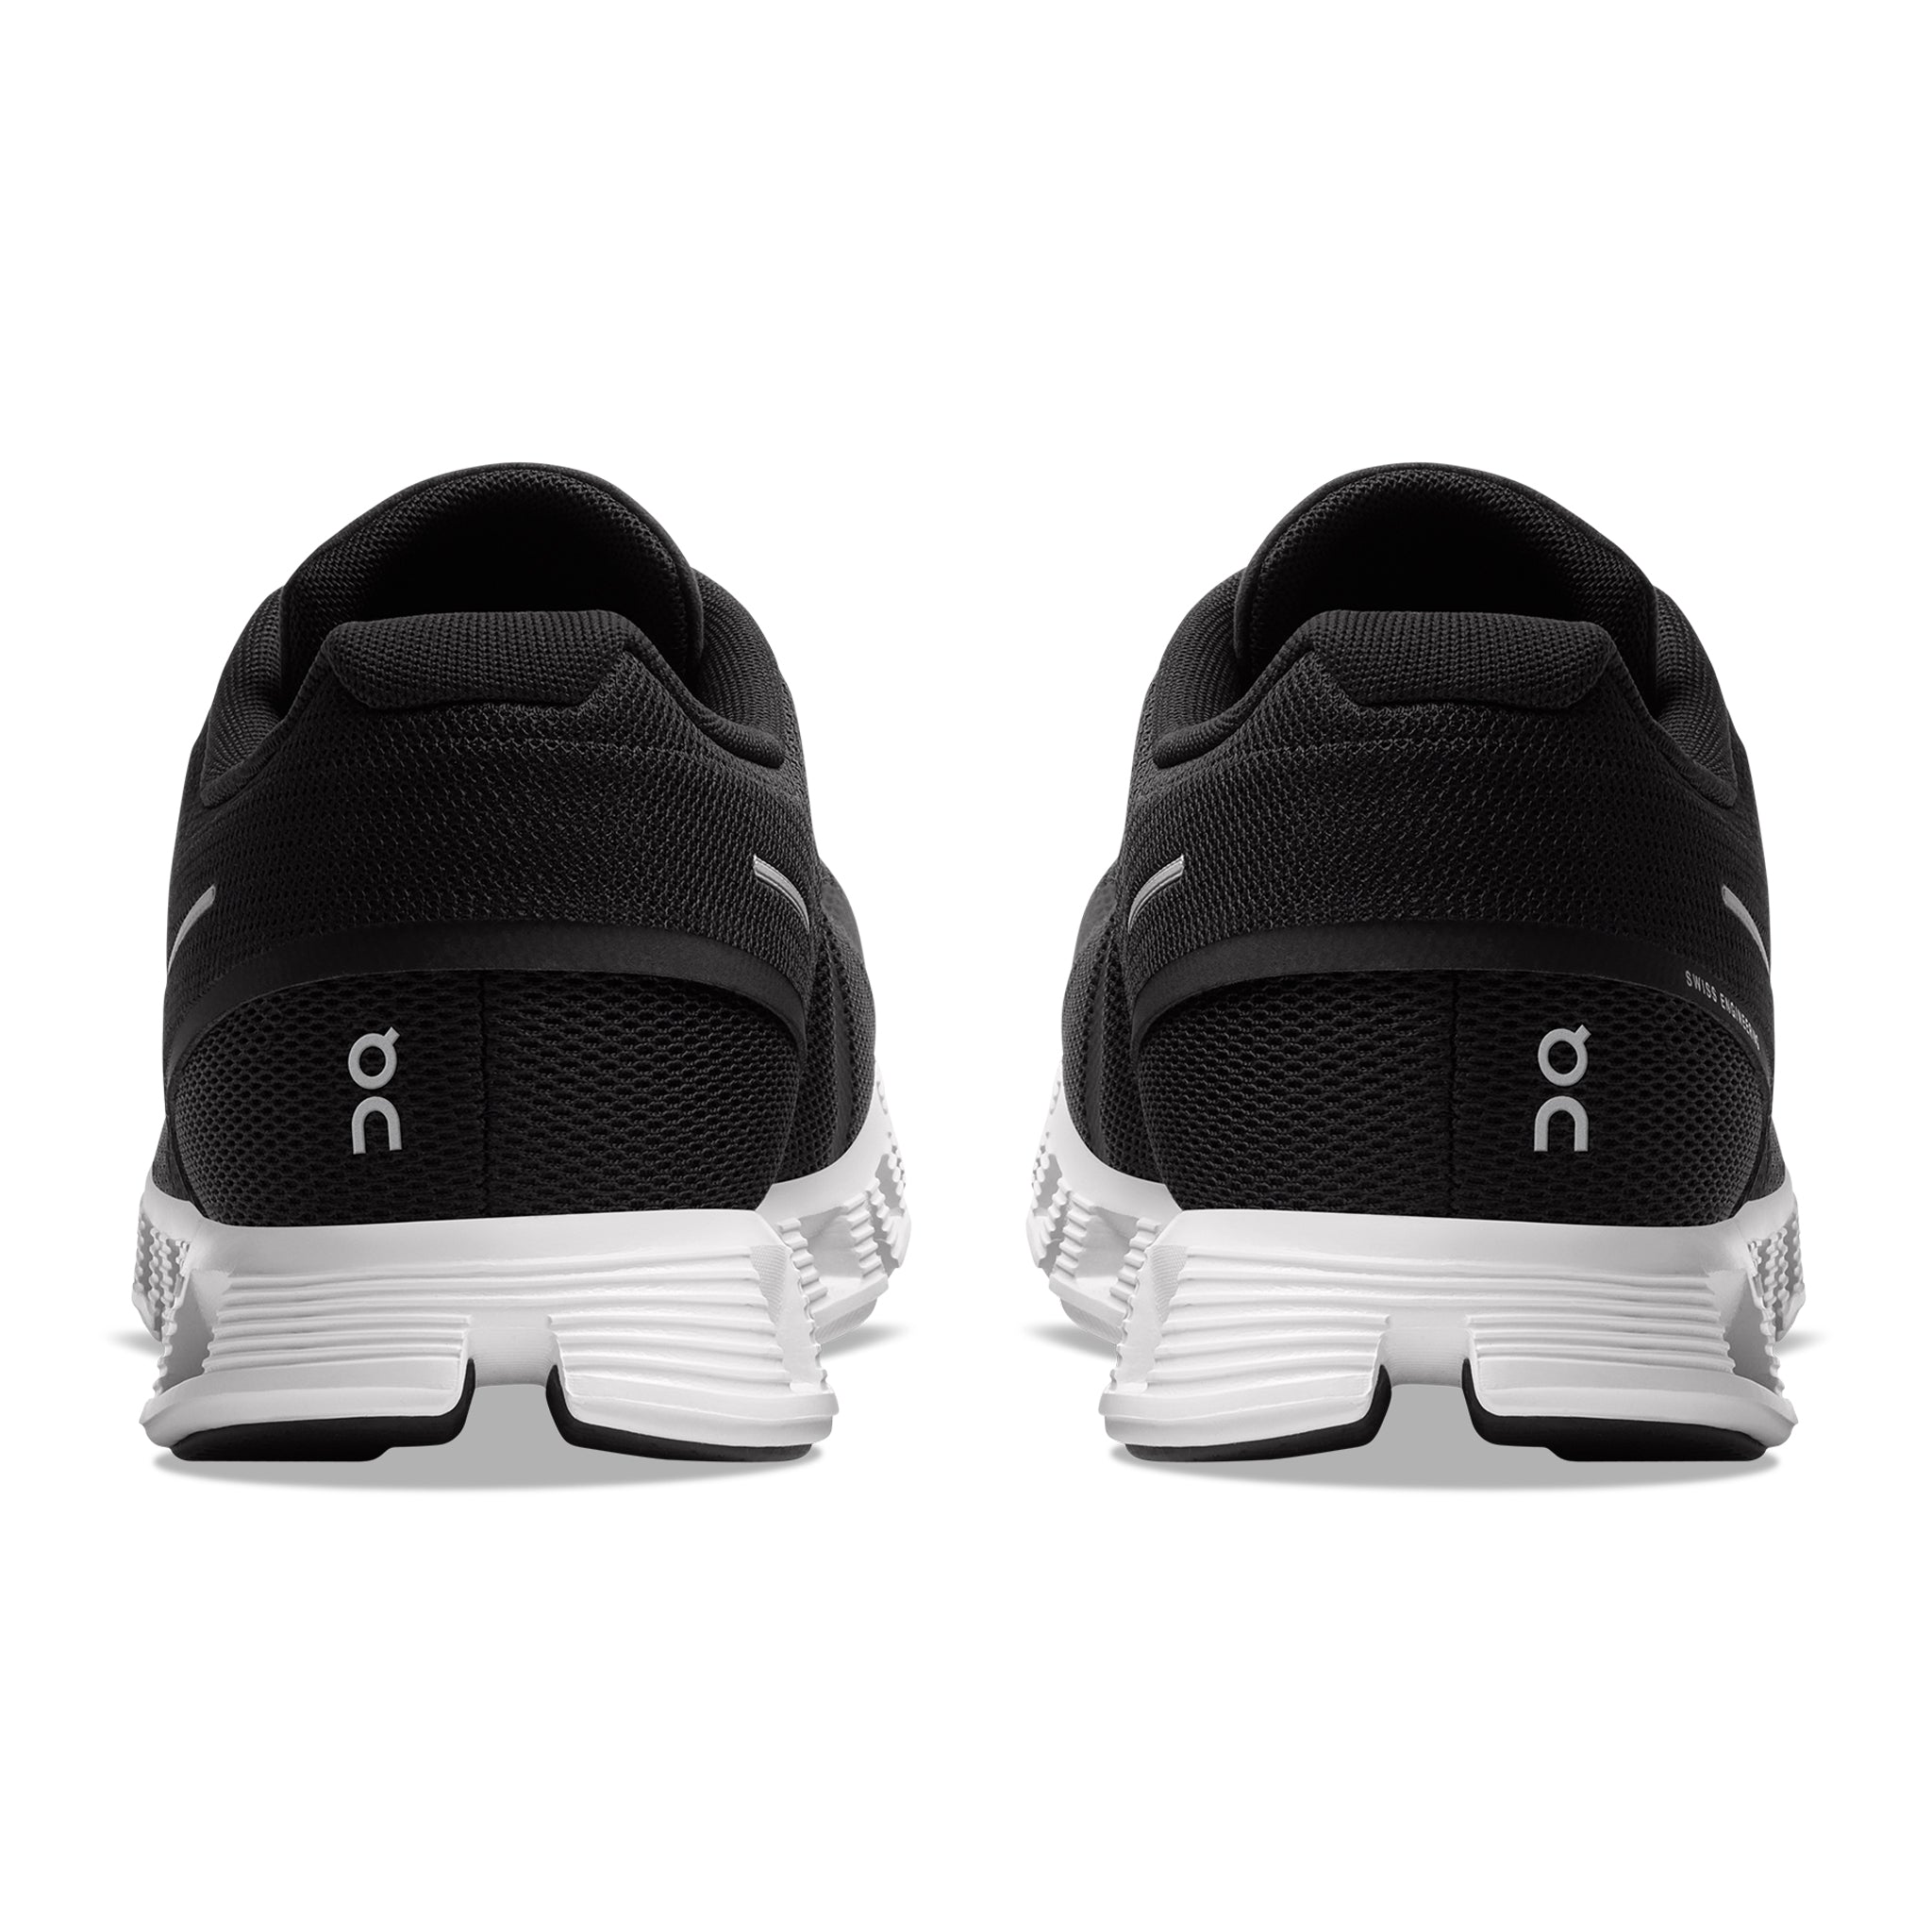 Back view of On Running Cloud 5 Black White Shoes 59.98919